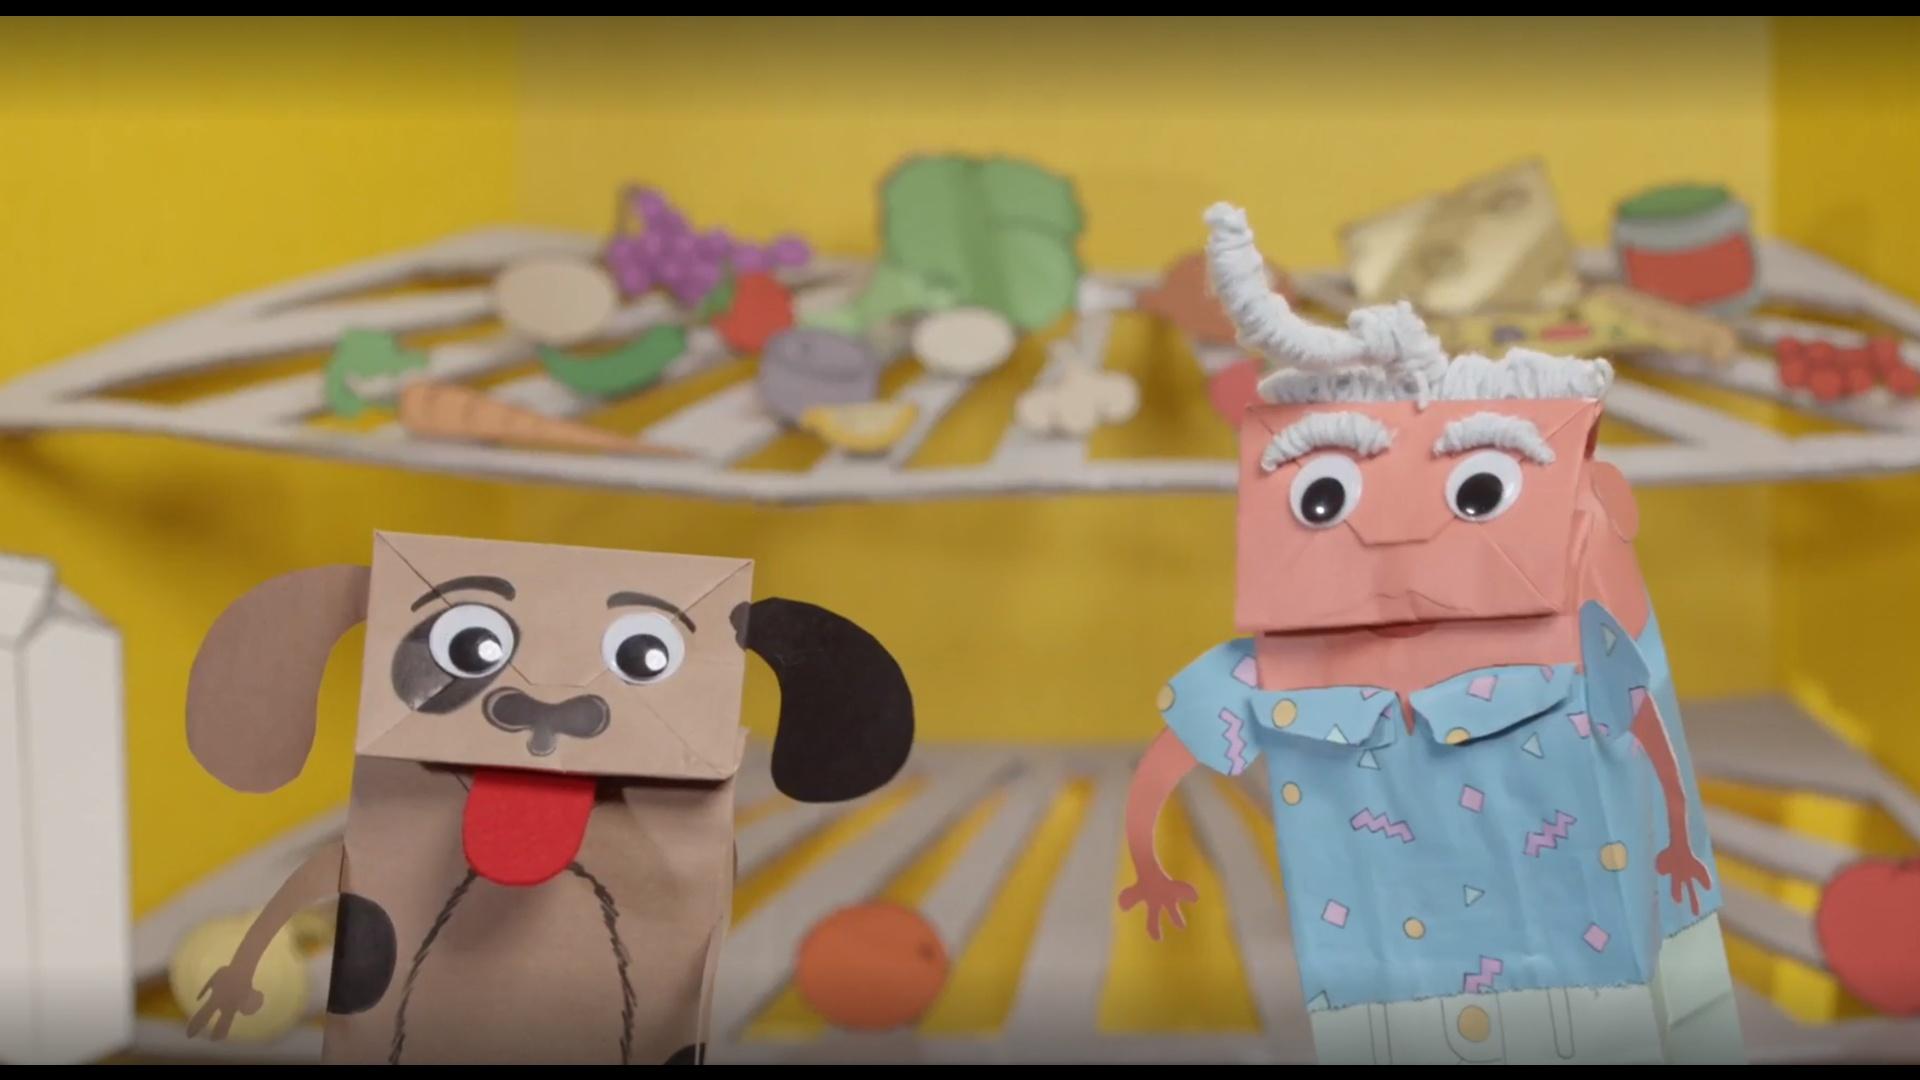 Two paper bag puppets standing in front of refrigerator shelves